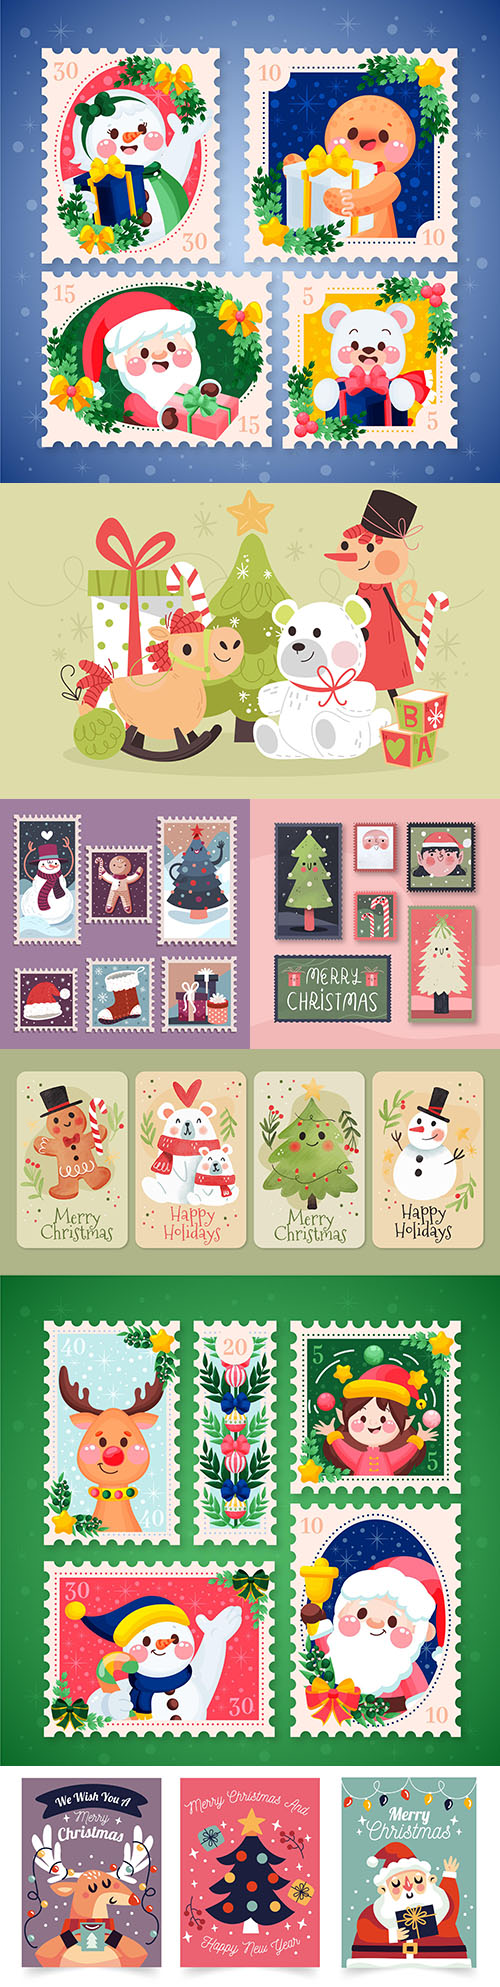 Christmas stamps and postcards flat design collection painted
